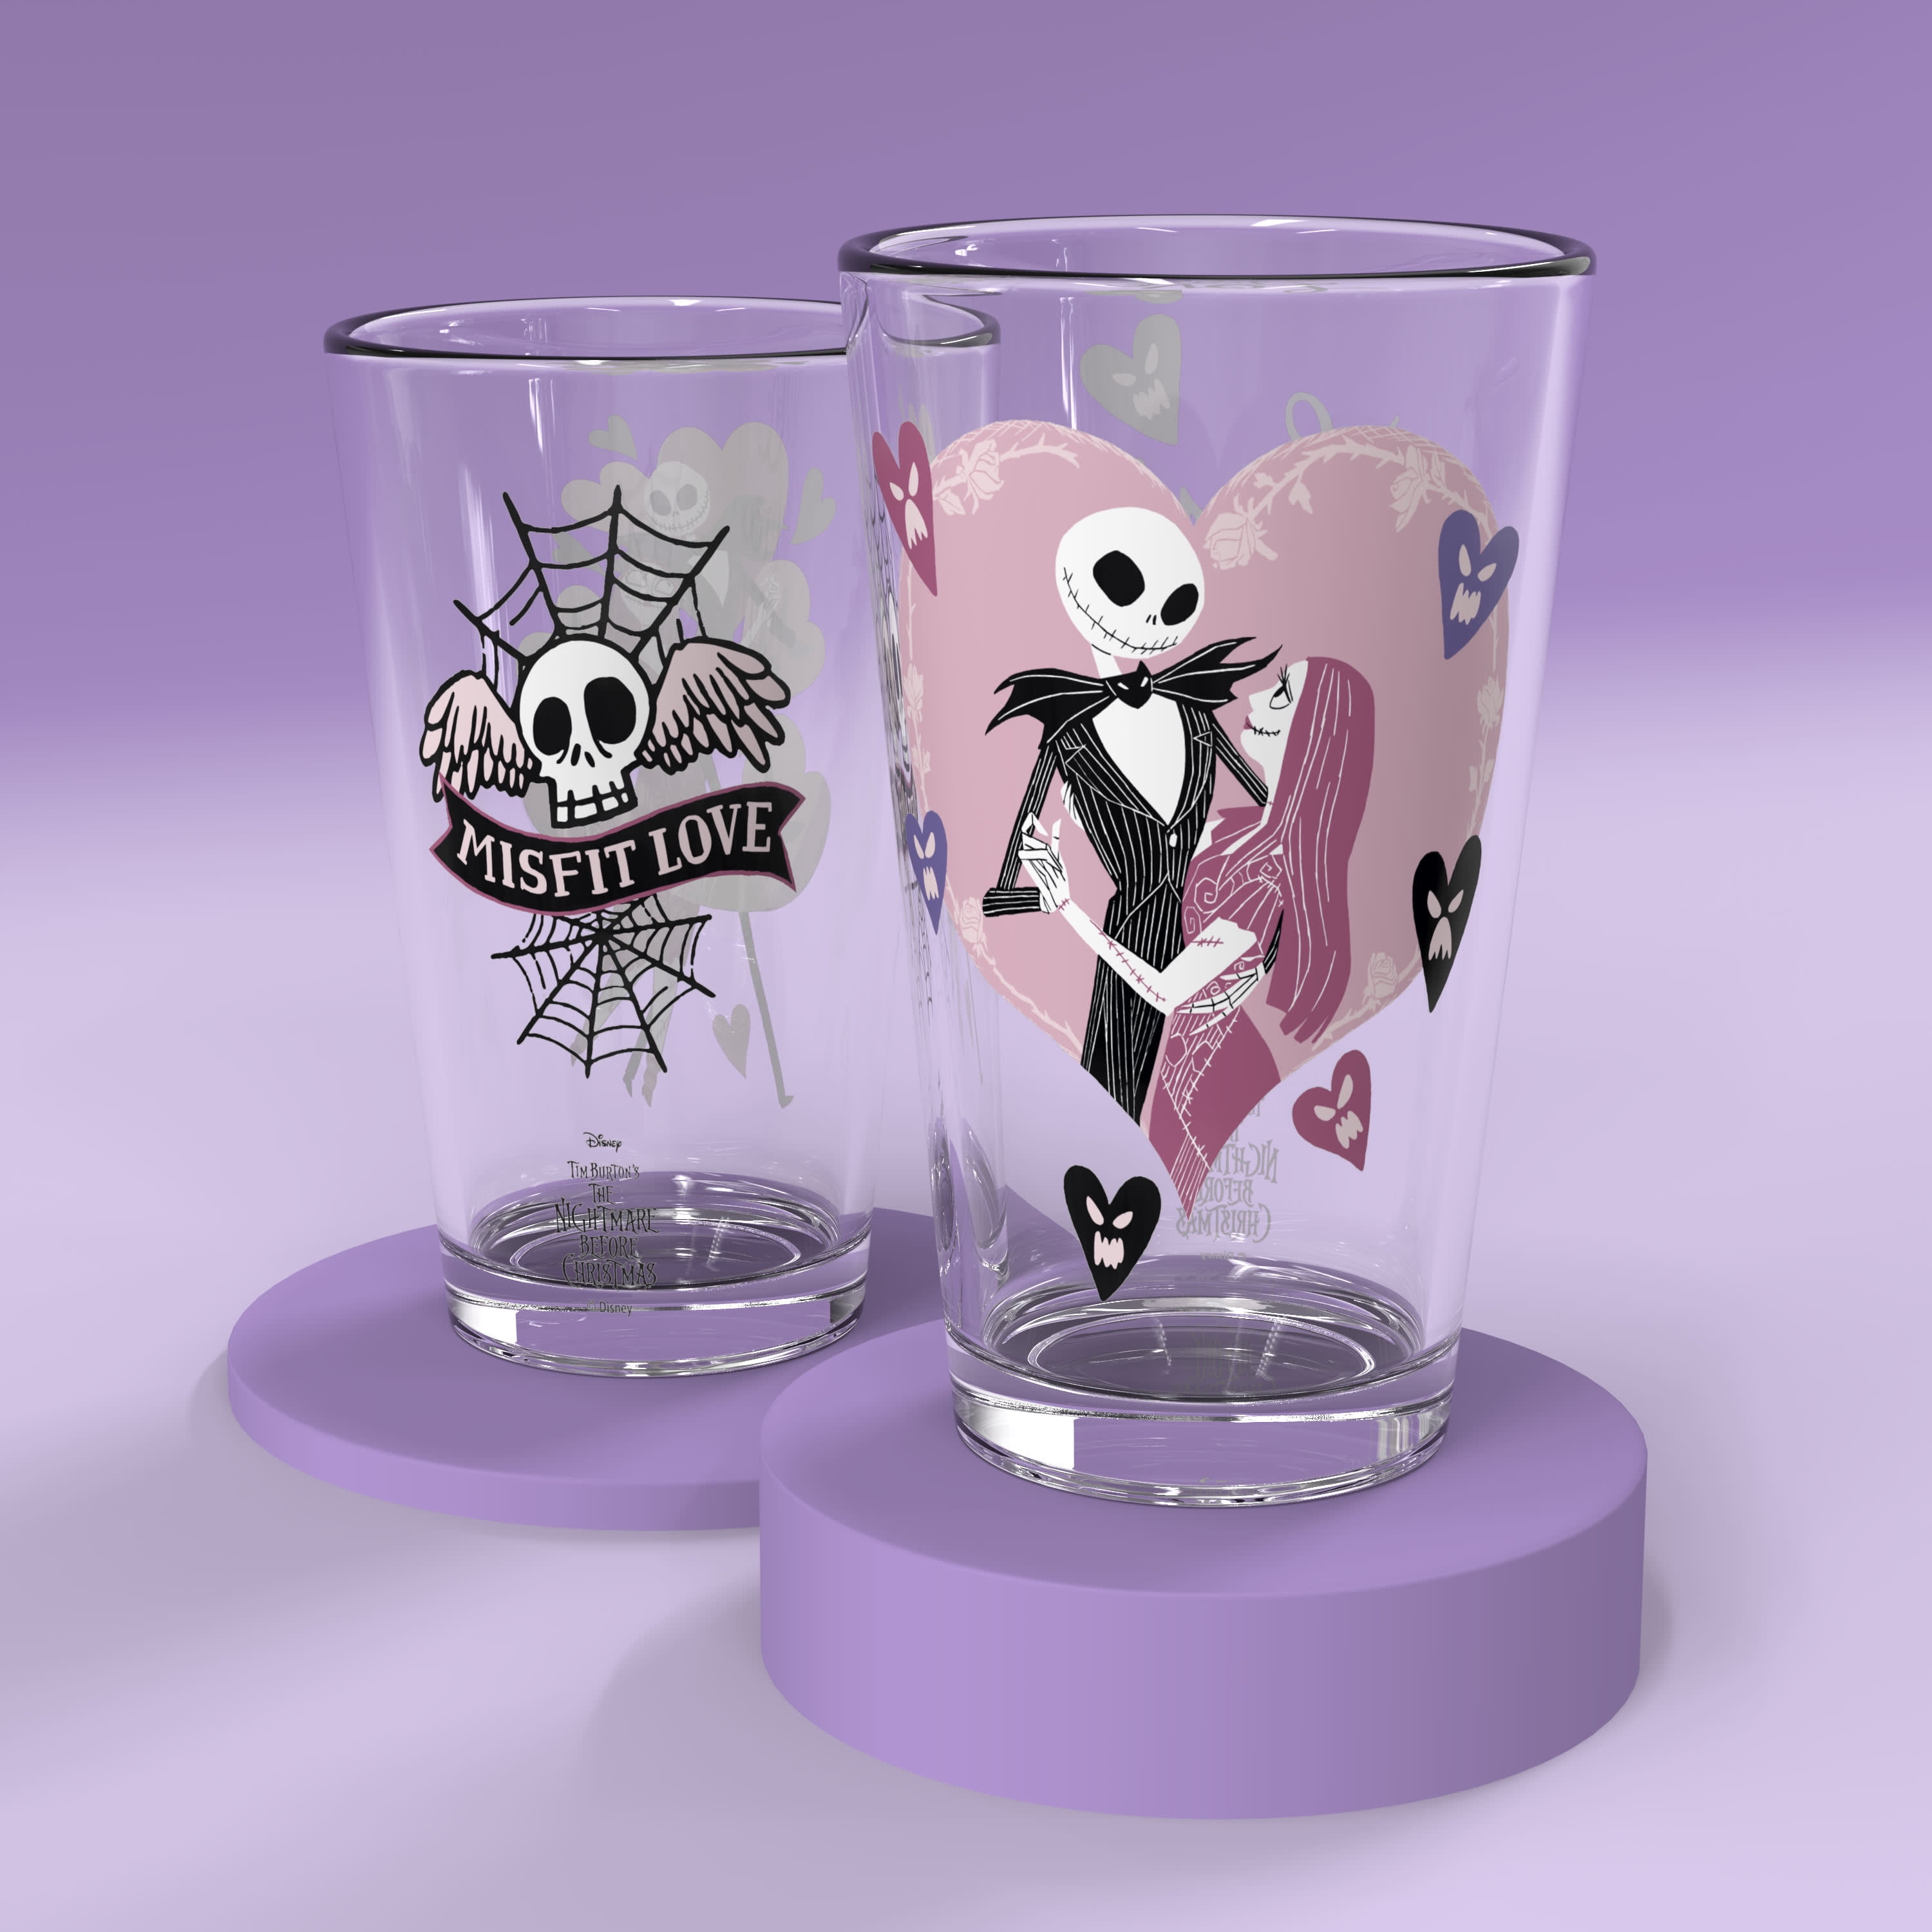 2019 SDCC Exclusive Star Wars Pint Glass 2-Pack From Seven20